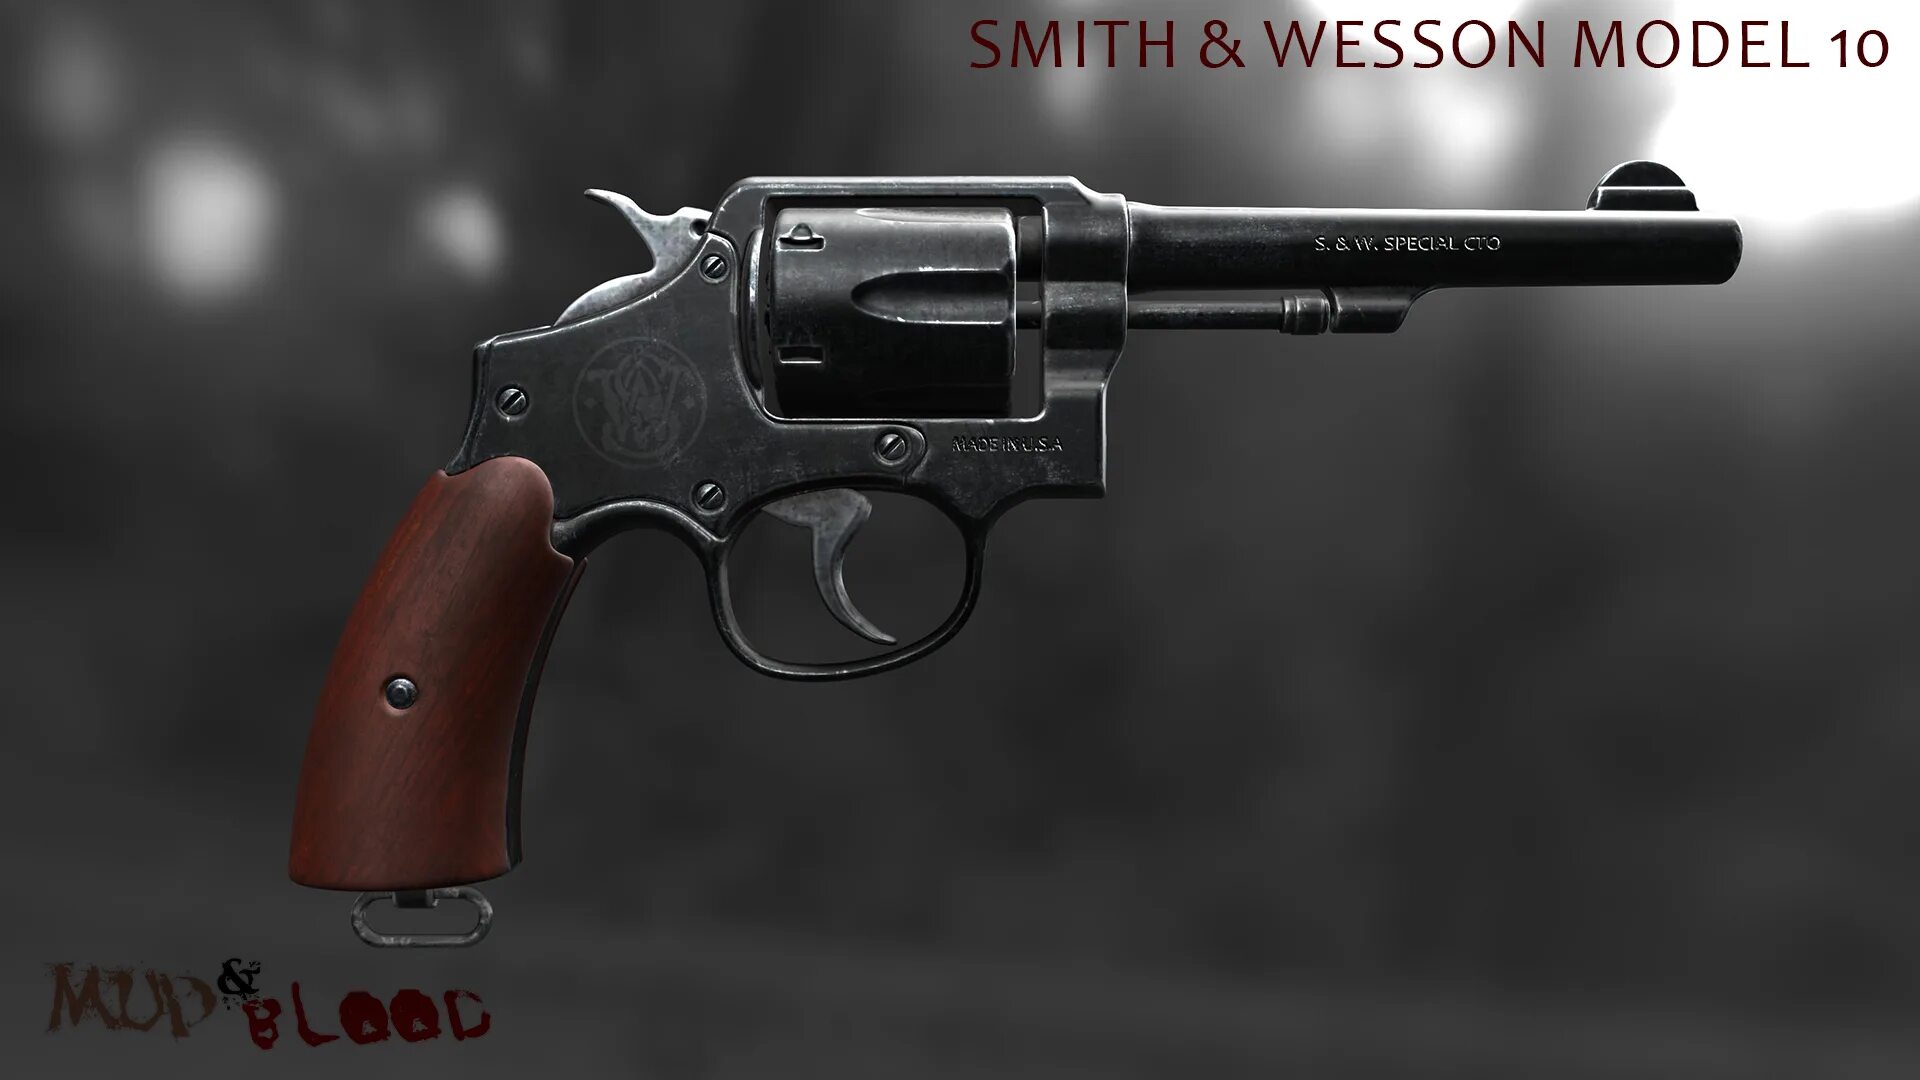 Just enough guns. Smith & Wesson model 10. Smith & Wesson model 10 разбор. Меню Smith & Wesson model 10. Insurgency Blood Mod.